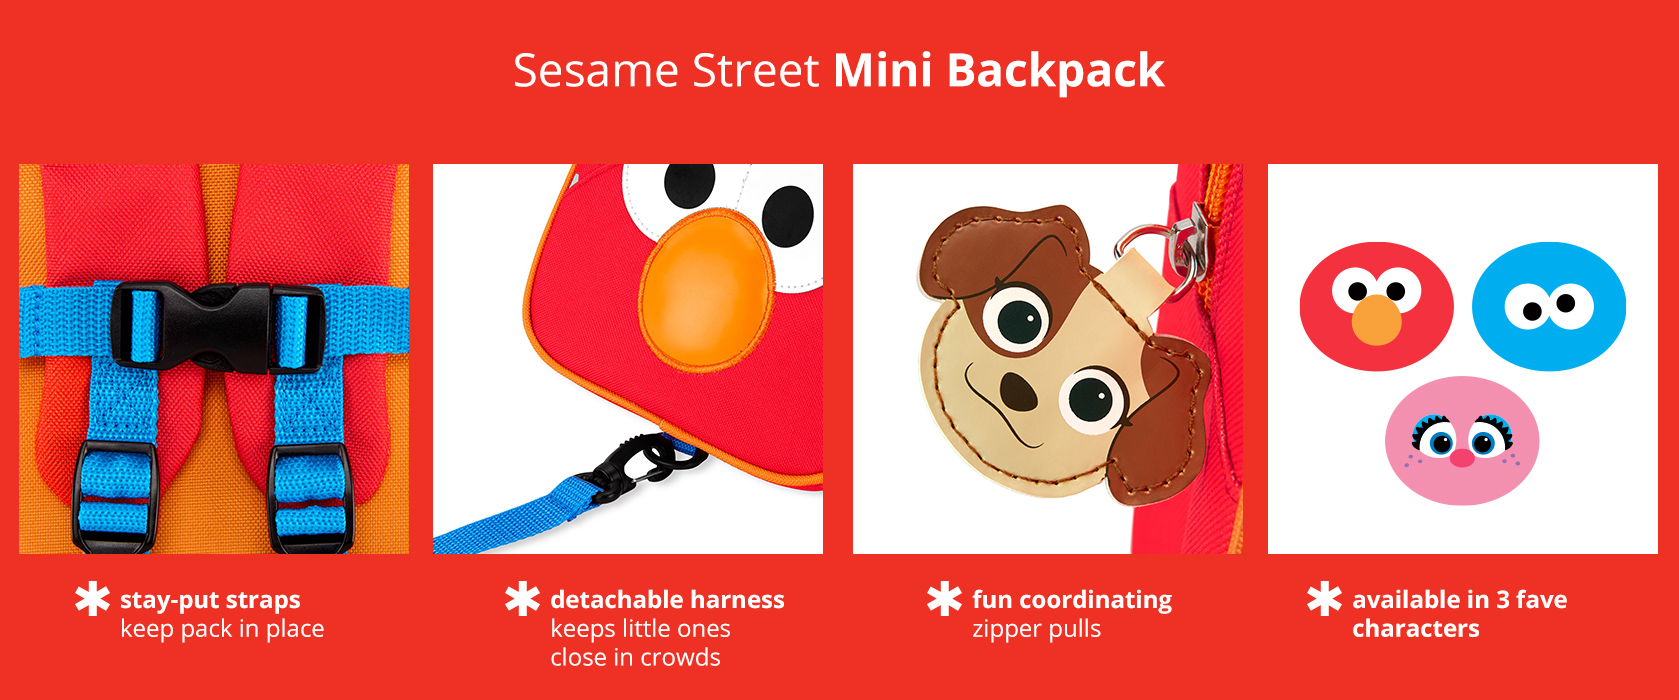 Skip Hop x Sesame Street Mini Backpack has stay-put straps to keep pack in place, a detachable
harness, and fun coordinating zipper pulls. Available in 3 characters.